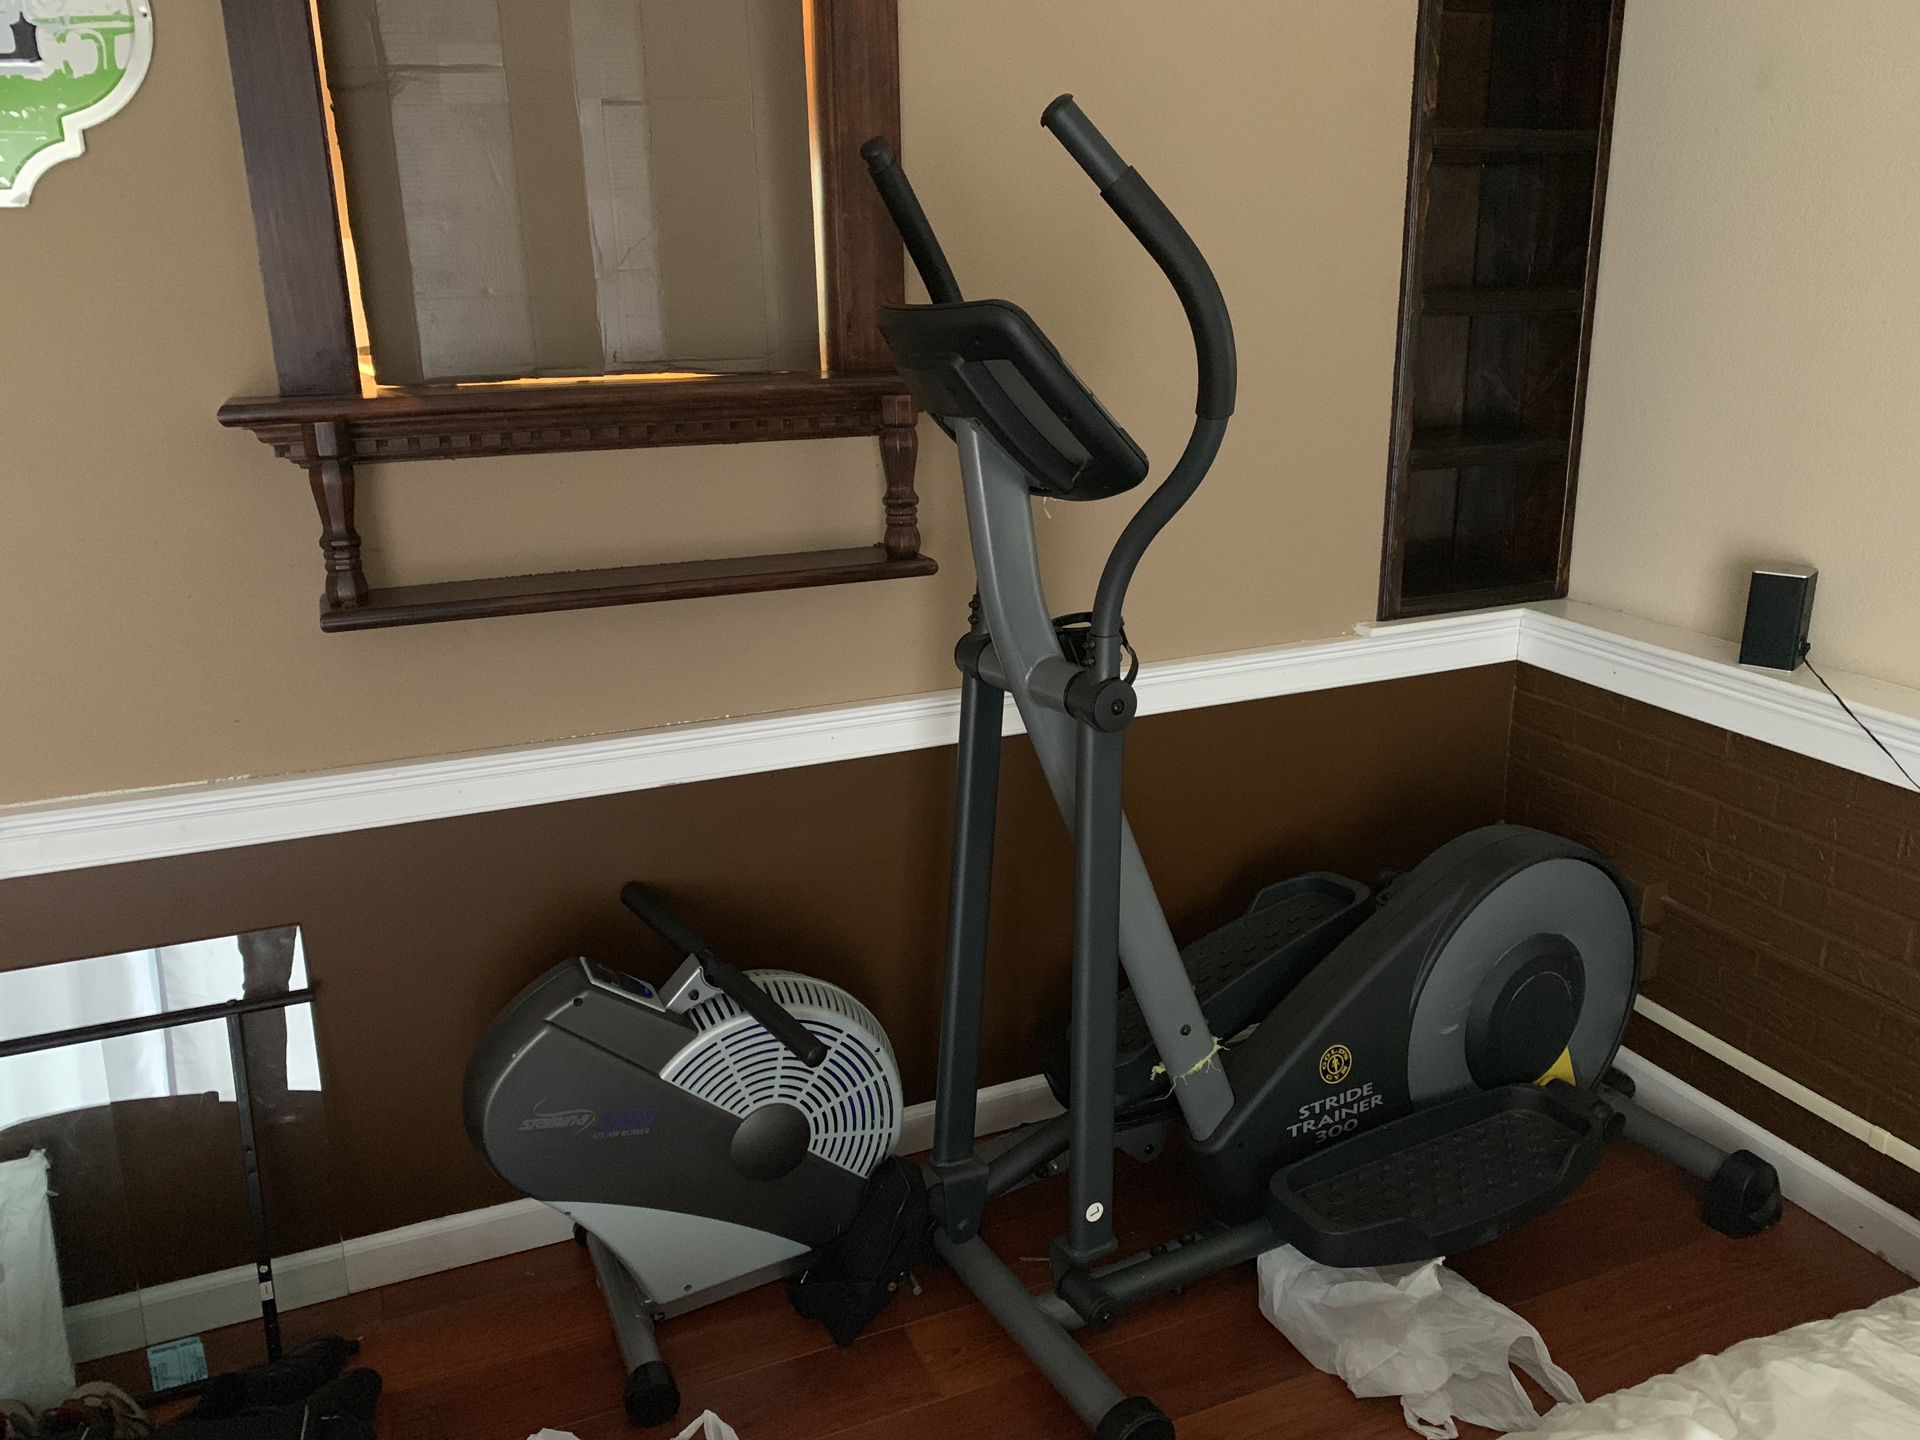 Rower and elliptical